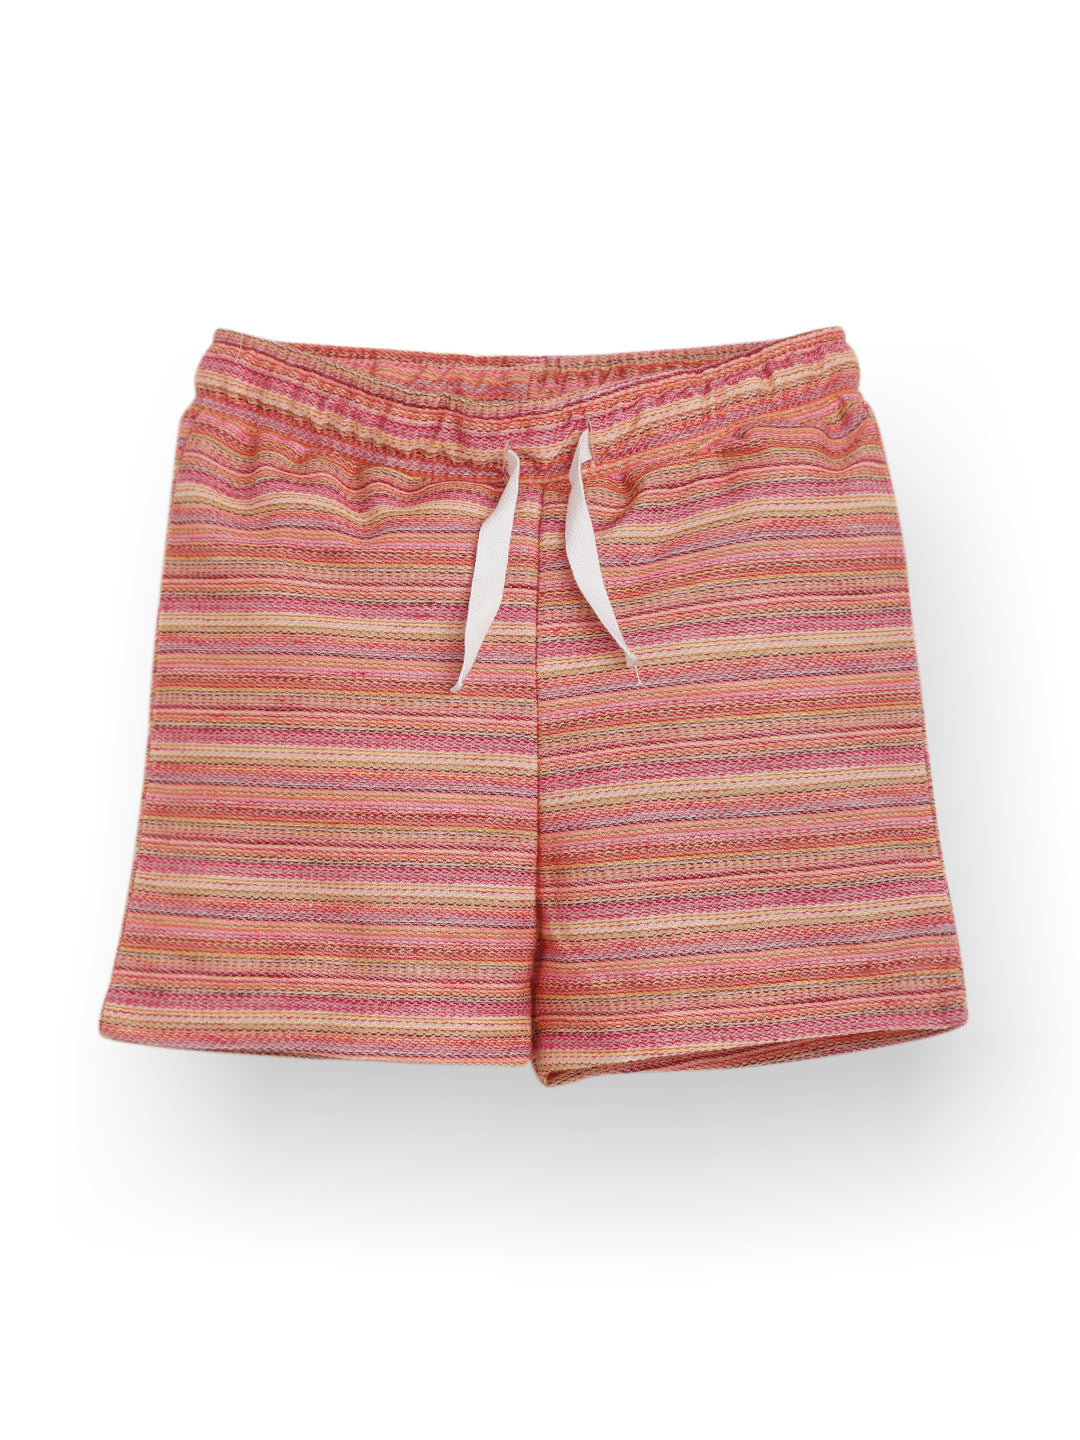 PINK TEXTURED COLORFUL GIRLS SHORTS -PINK